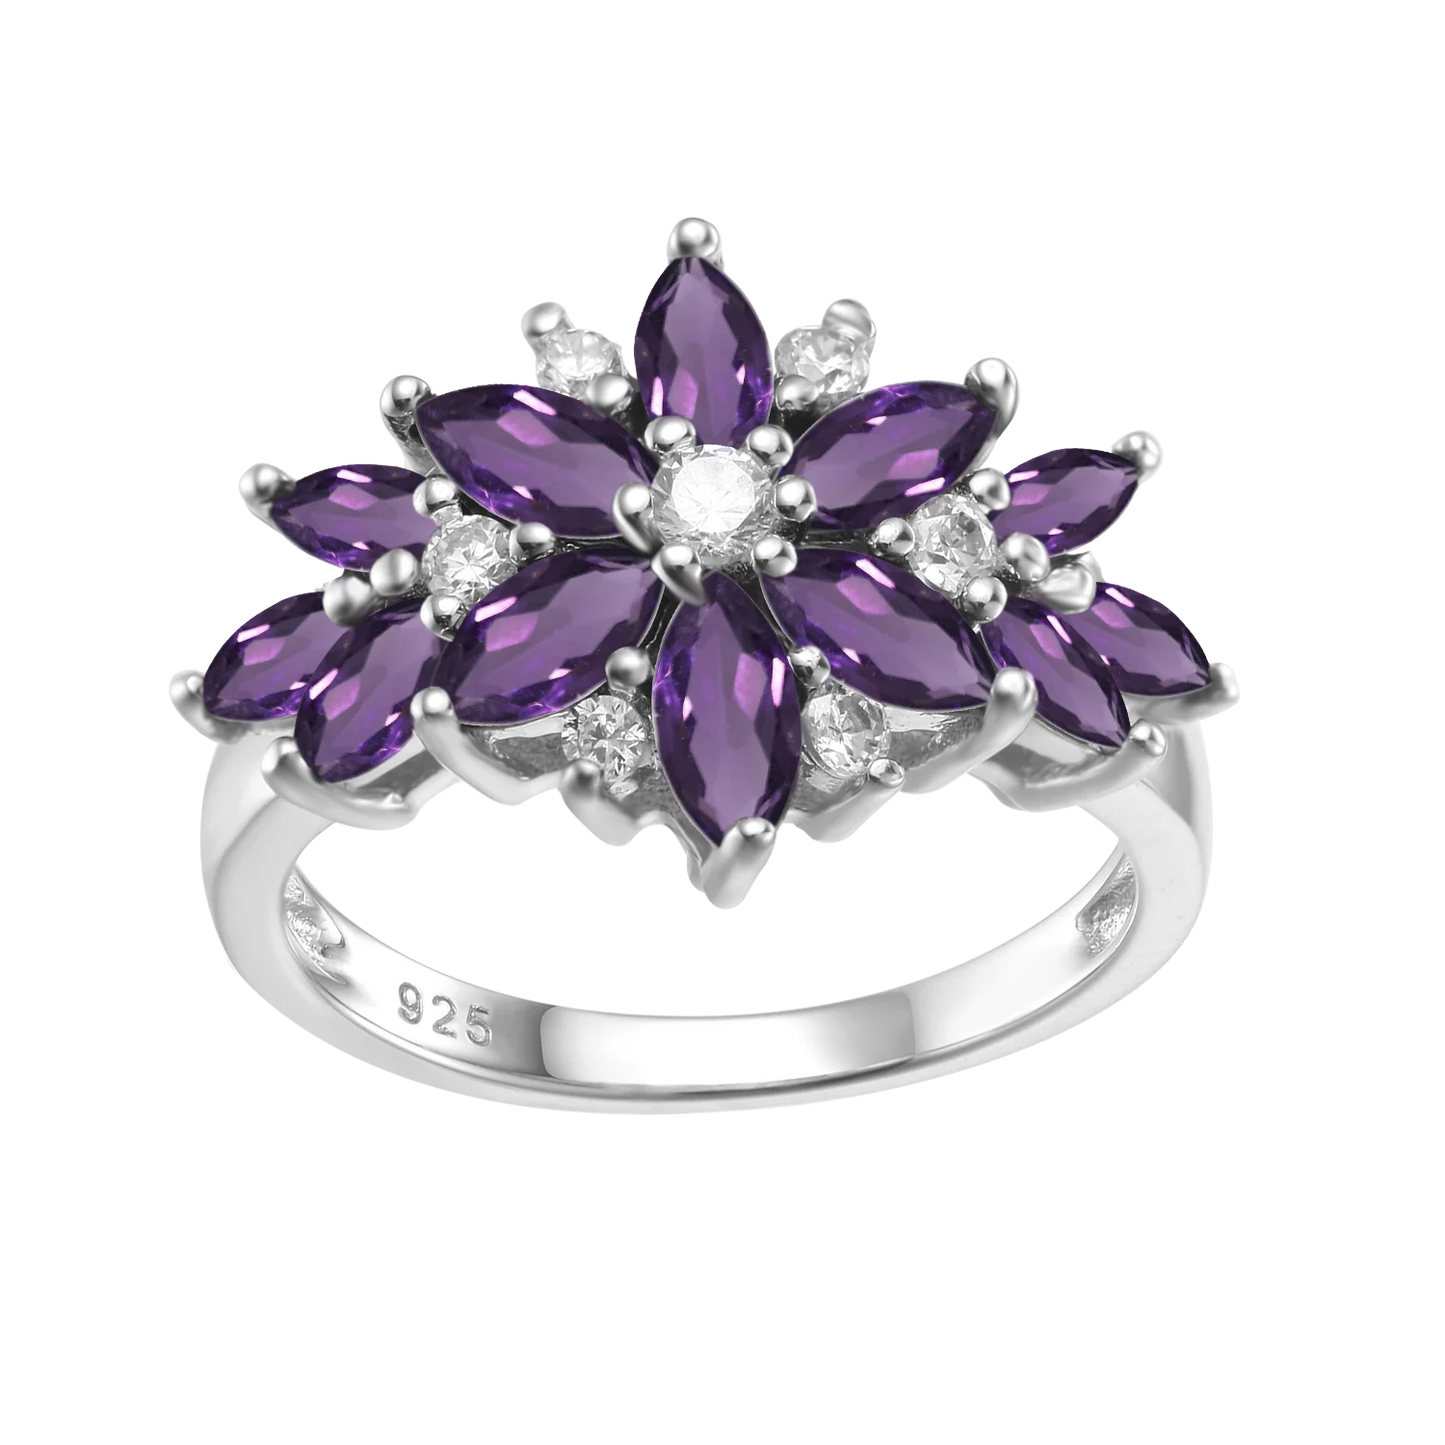 GEM'S BALLET Real 925 Sterling Silver Tourmaline Rings For Women Natural Gemstone Ring Romantic Gift Engagement Jewelry Amethyst CHINA